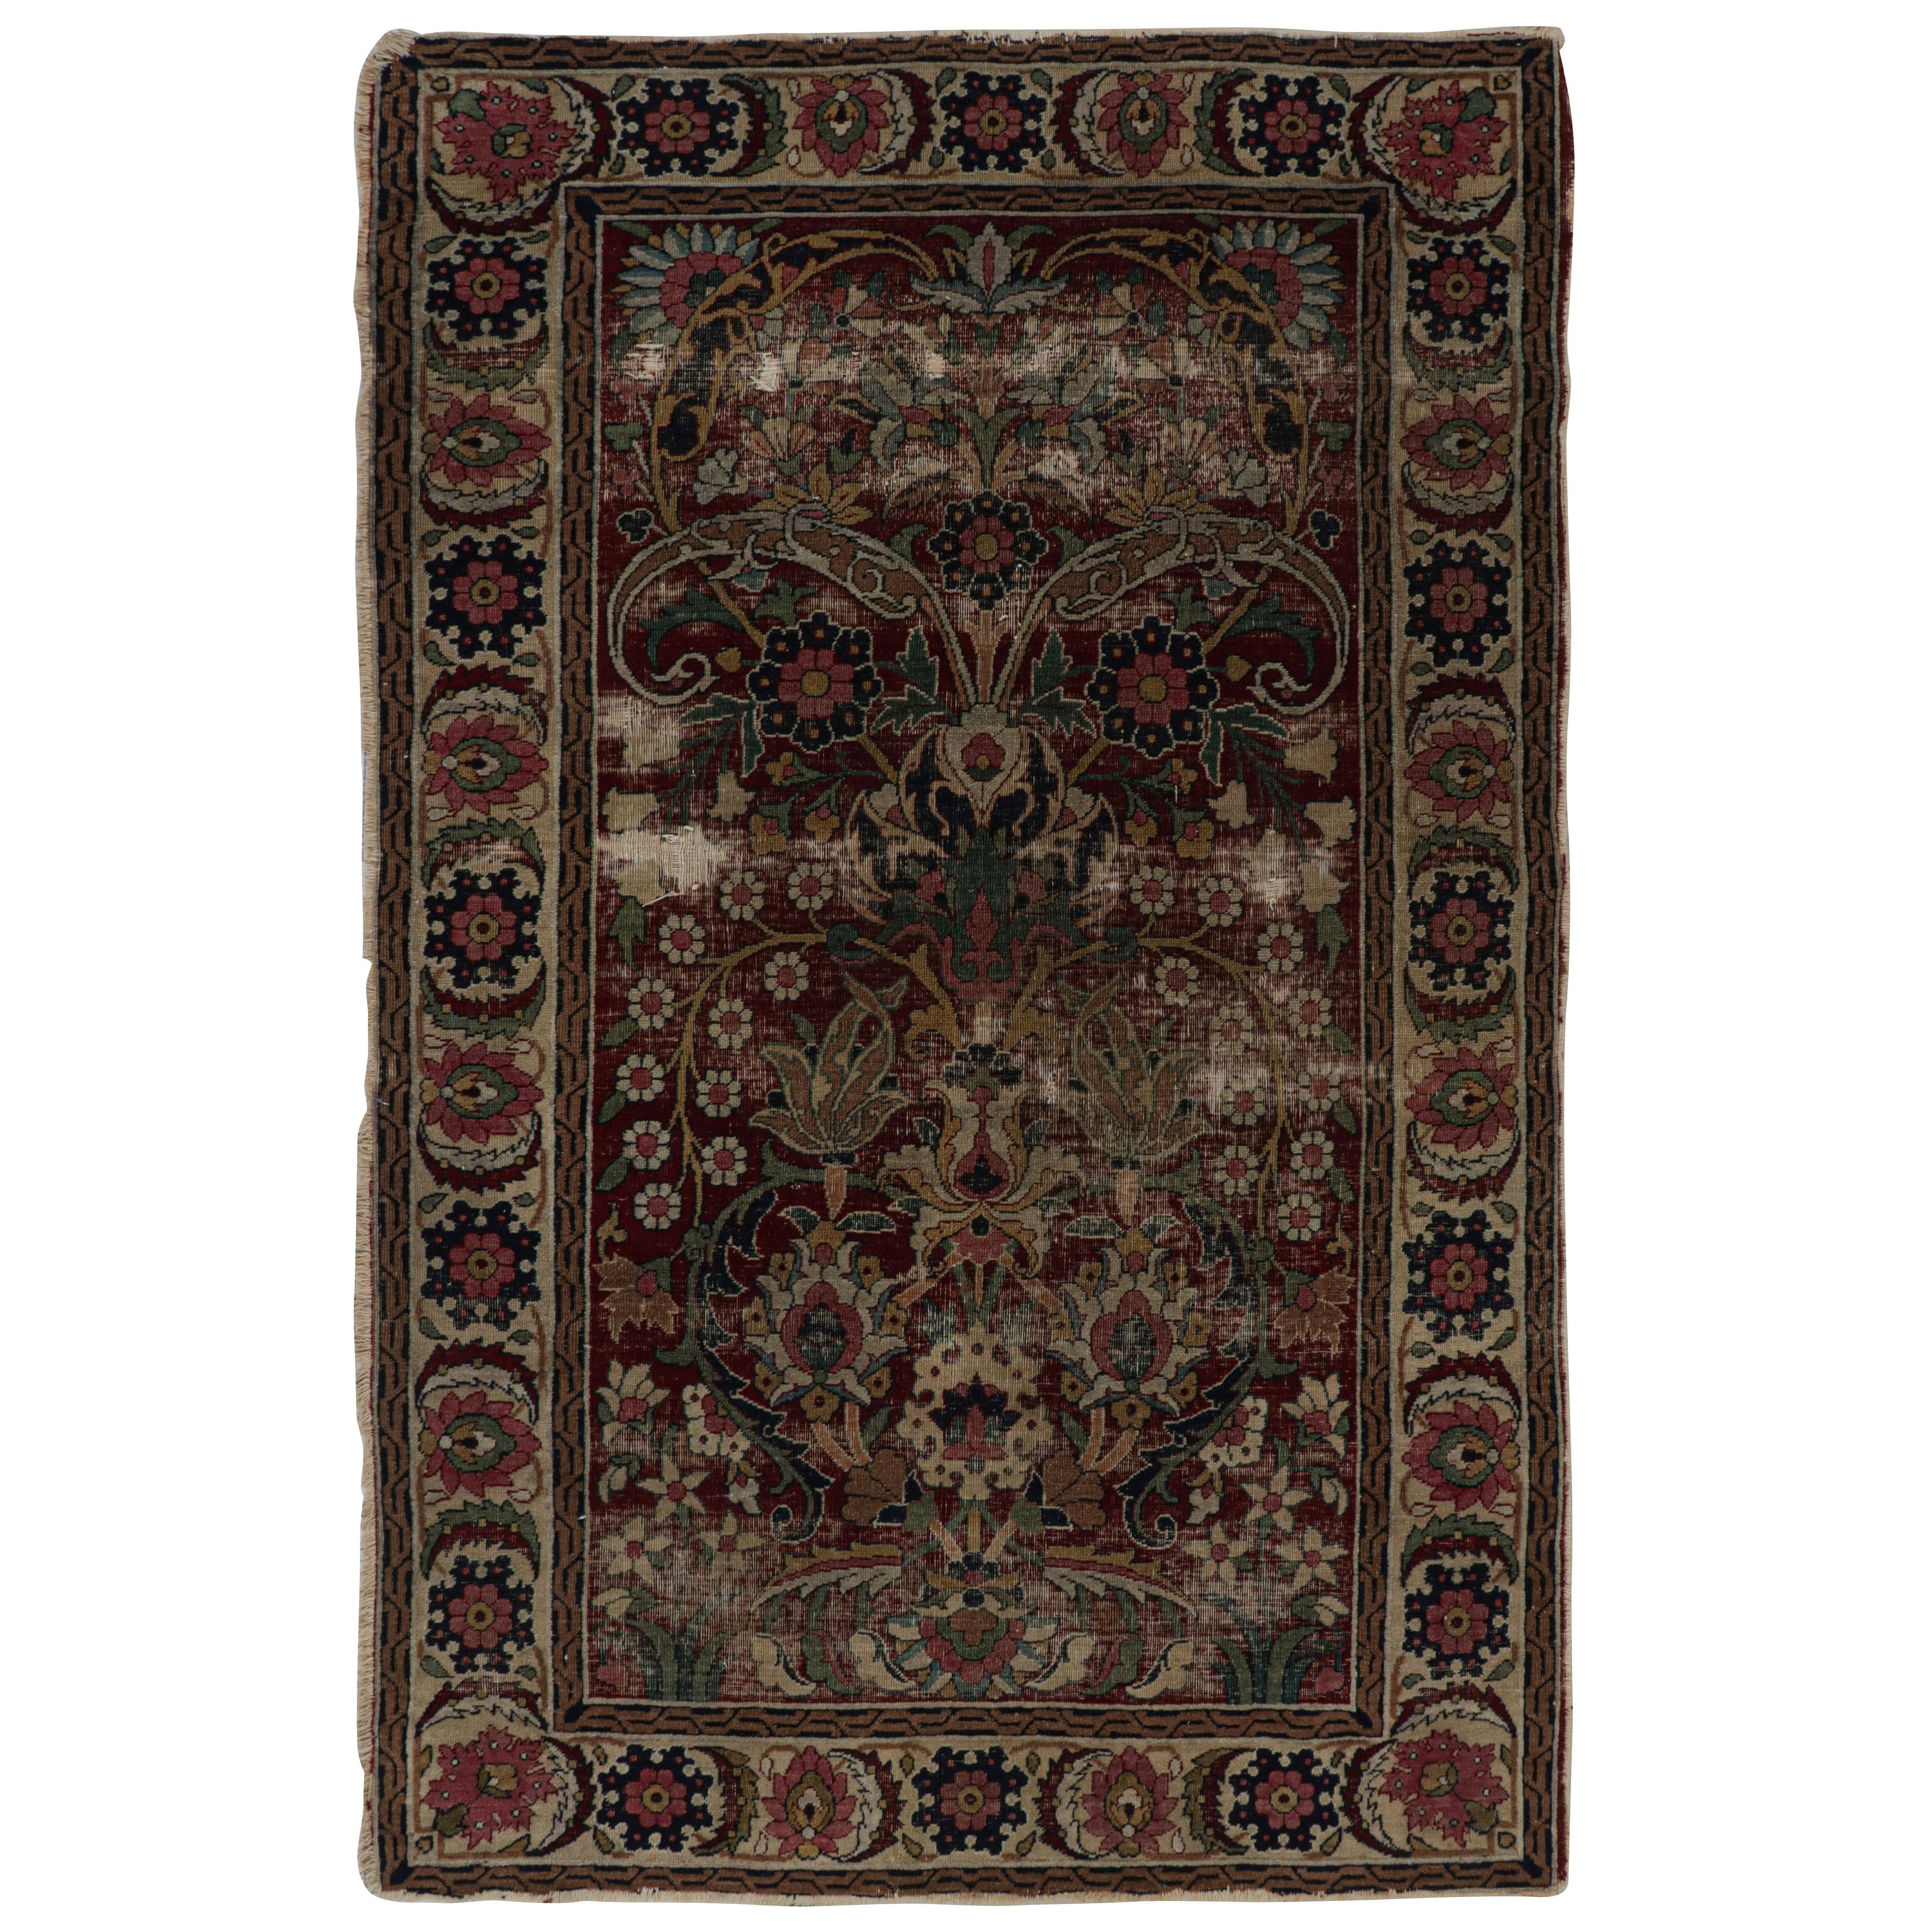 Antique Persian Khorassan Rug in Burgundy with Floral Patterns, from Rug & Kilim For Sale